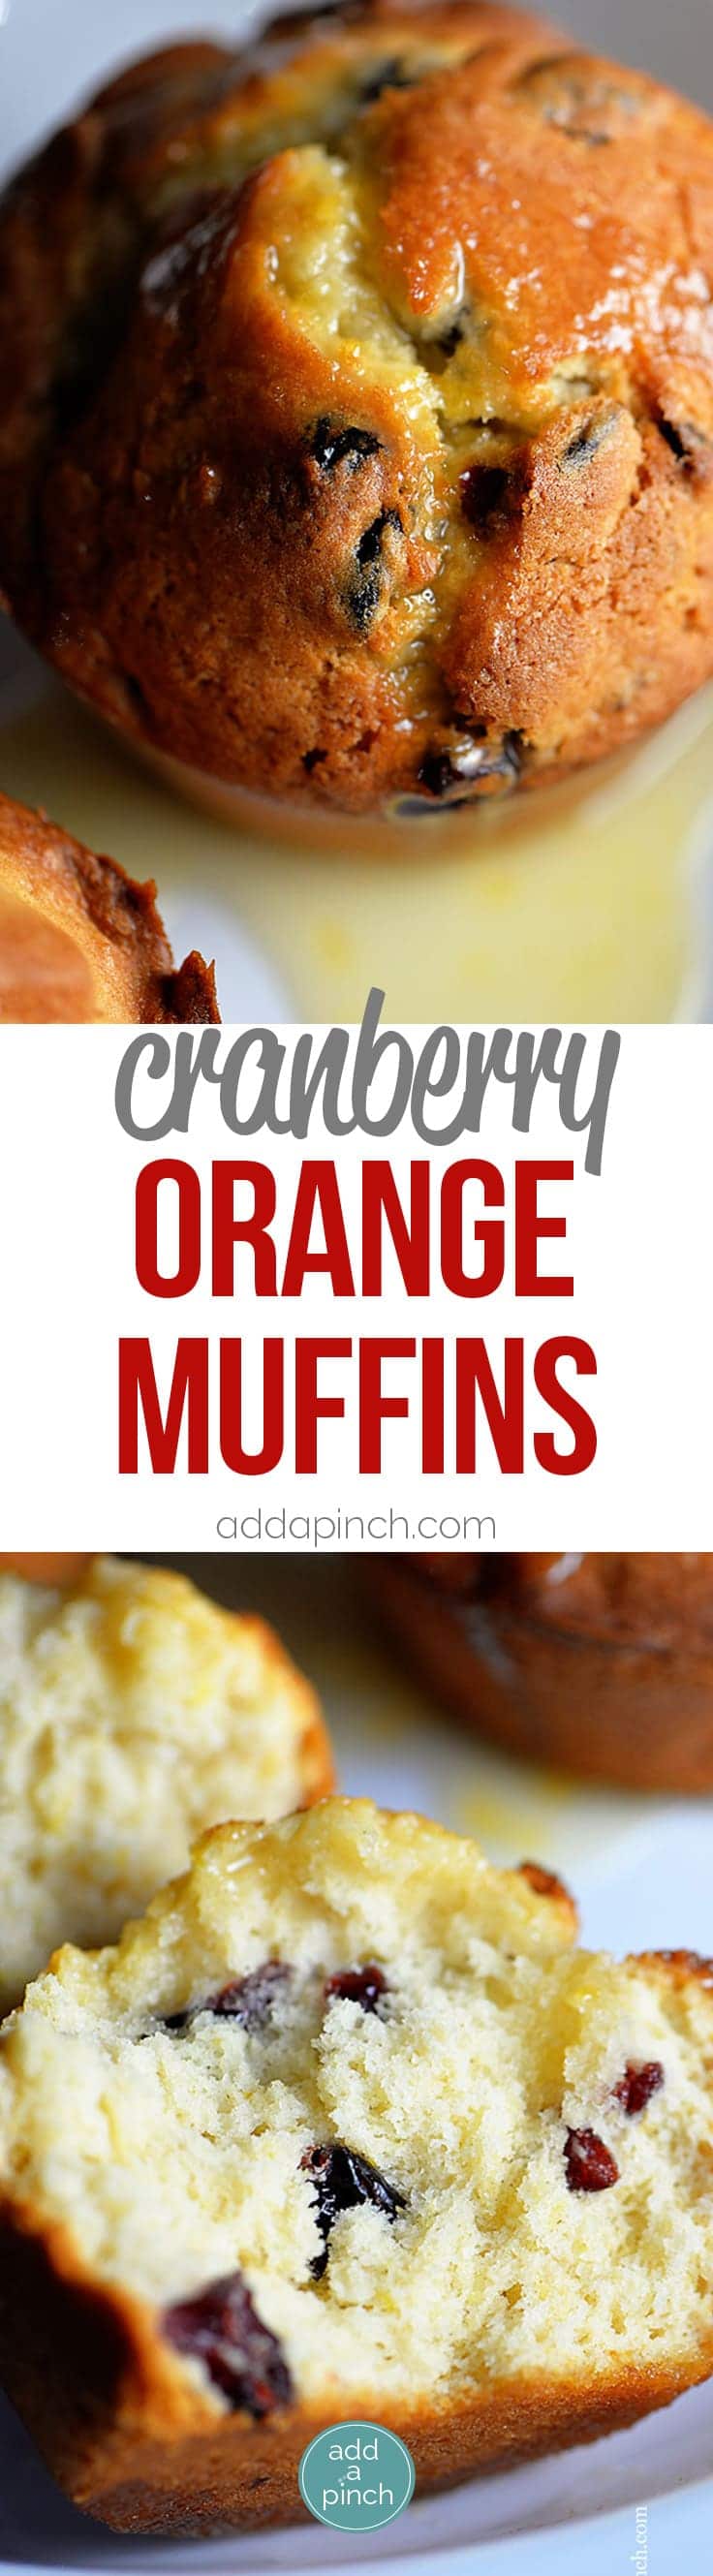 Cranberry Orange Muffins Recipe - Bakery style Cranberry Orange Muffins make the perfect addition to any breakfast. This easy muffin recipe is always a favorite! // addapinch.com